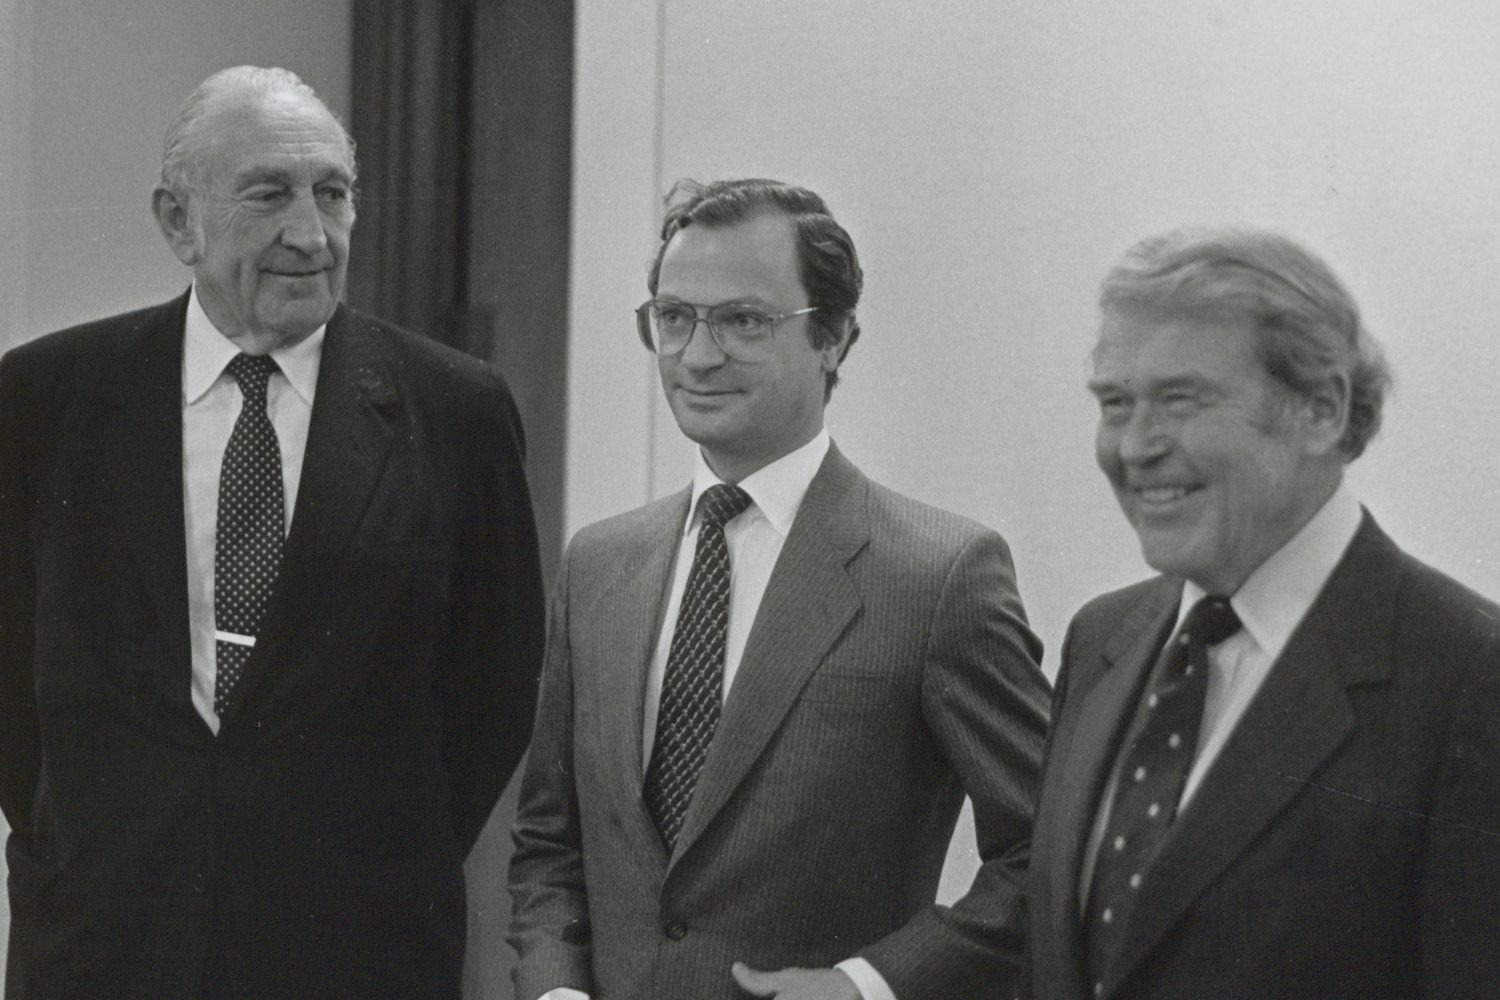 Photo of Dave Packard (left), Bill Hewlett (right) and Swedish King Carl XVI (center) taken in 1984.